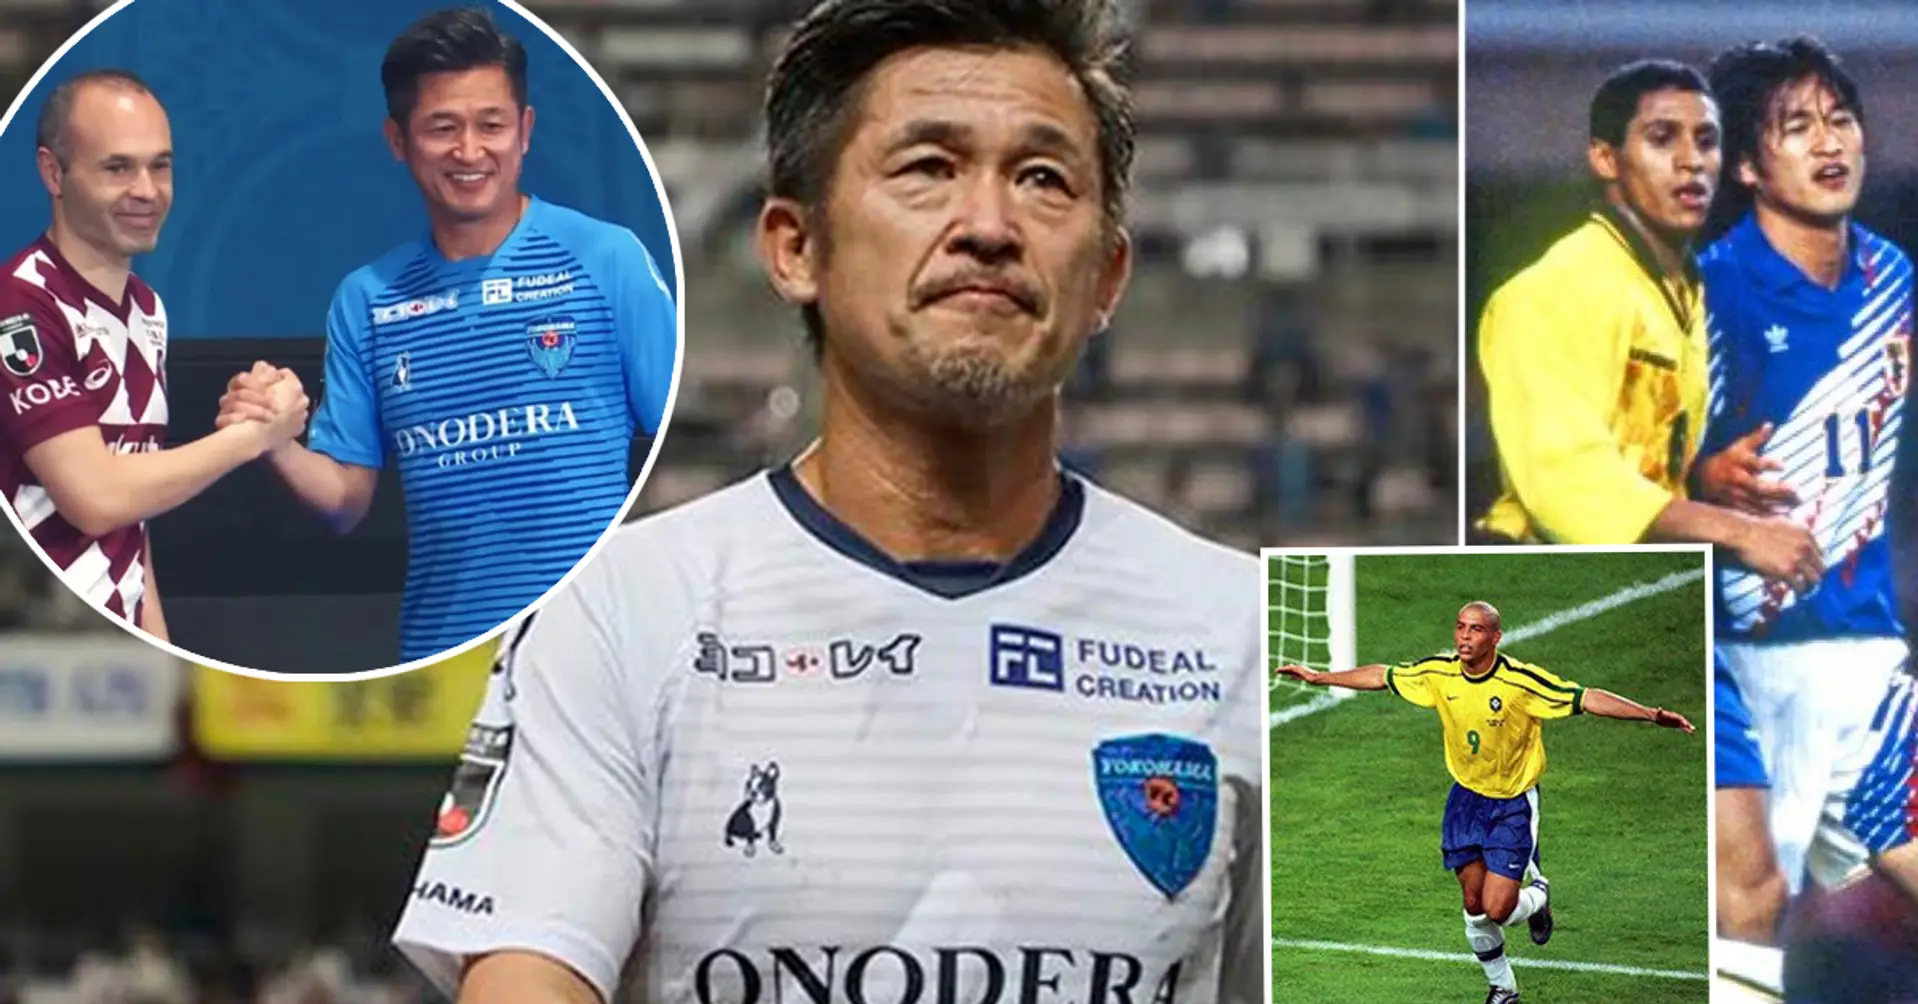 53-year-old Kazuyoshi Miura signs new contract. Turns out he even played against Ronaldo